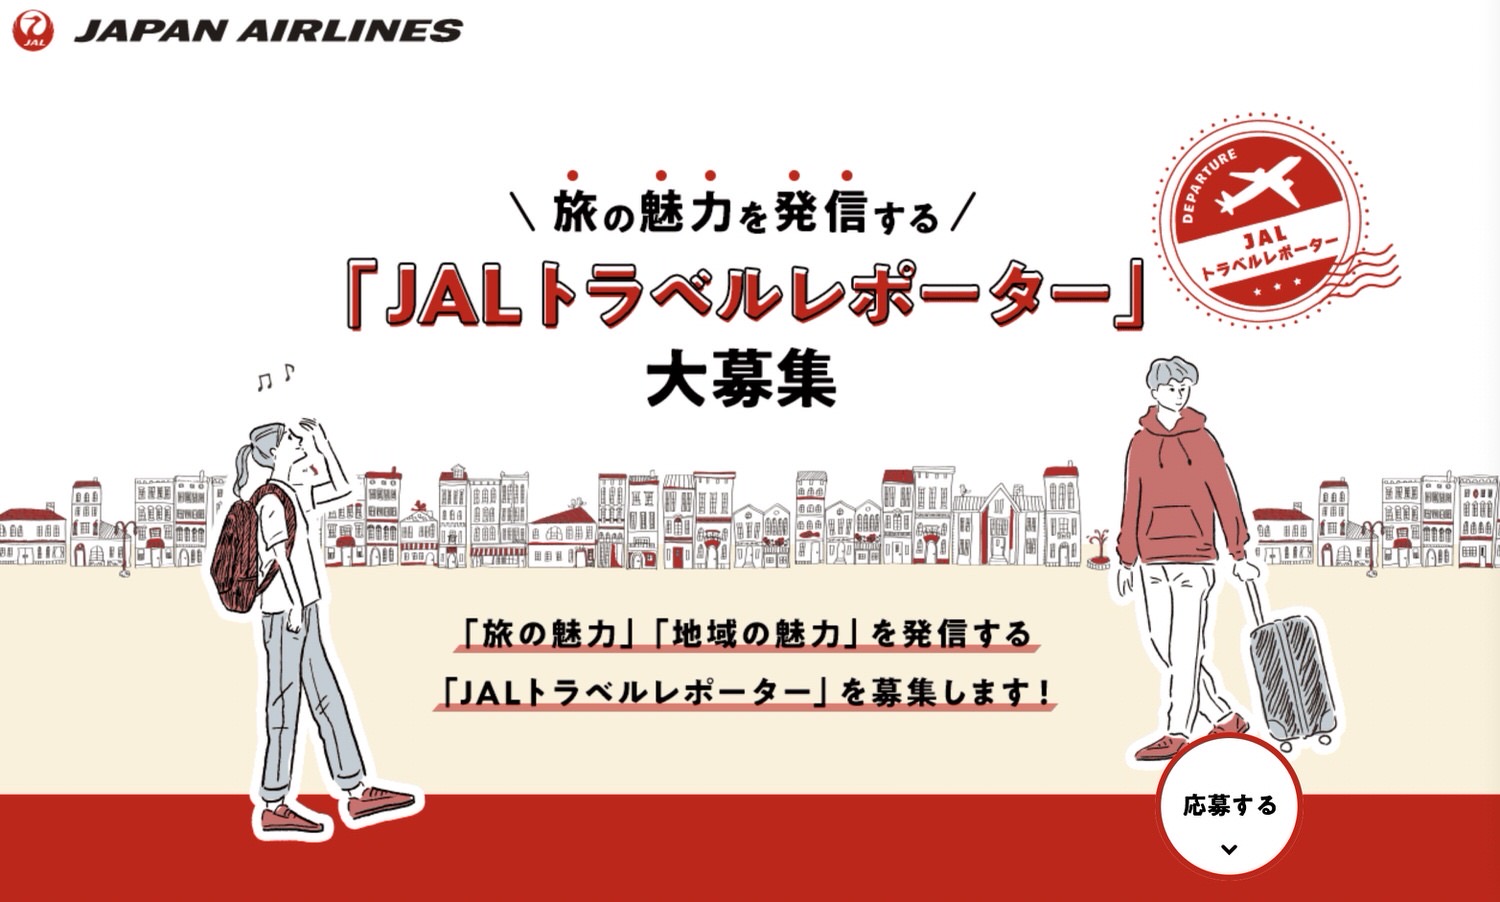 Jal travel reporter